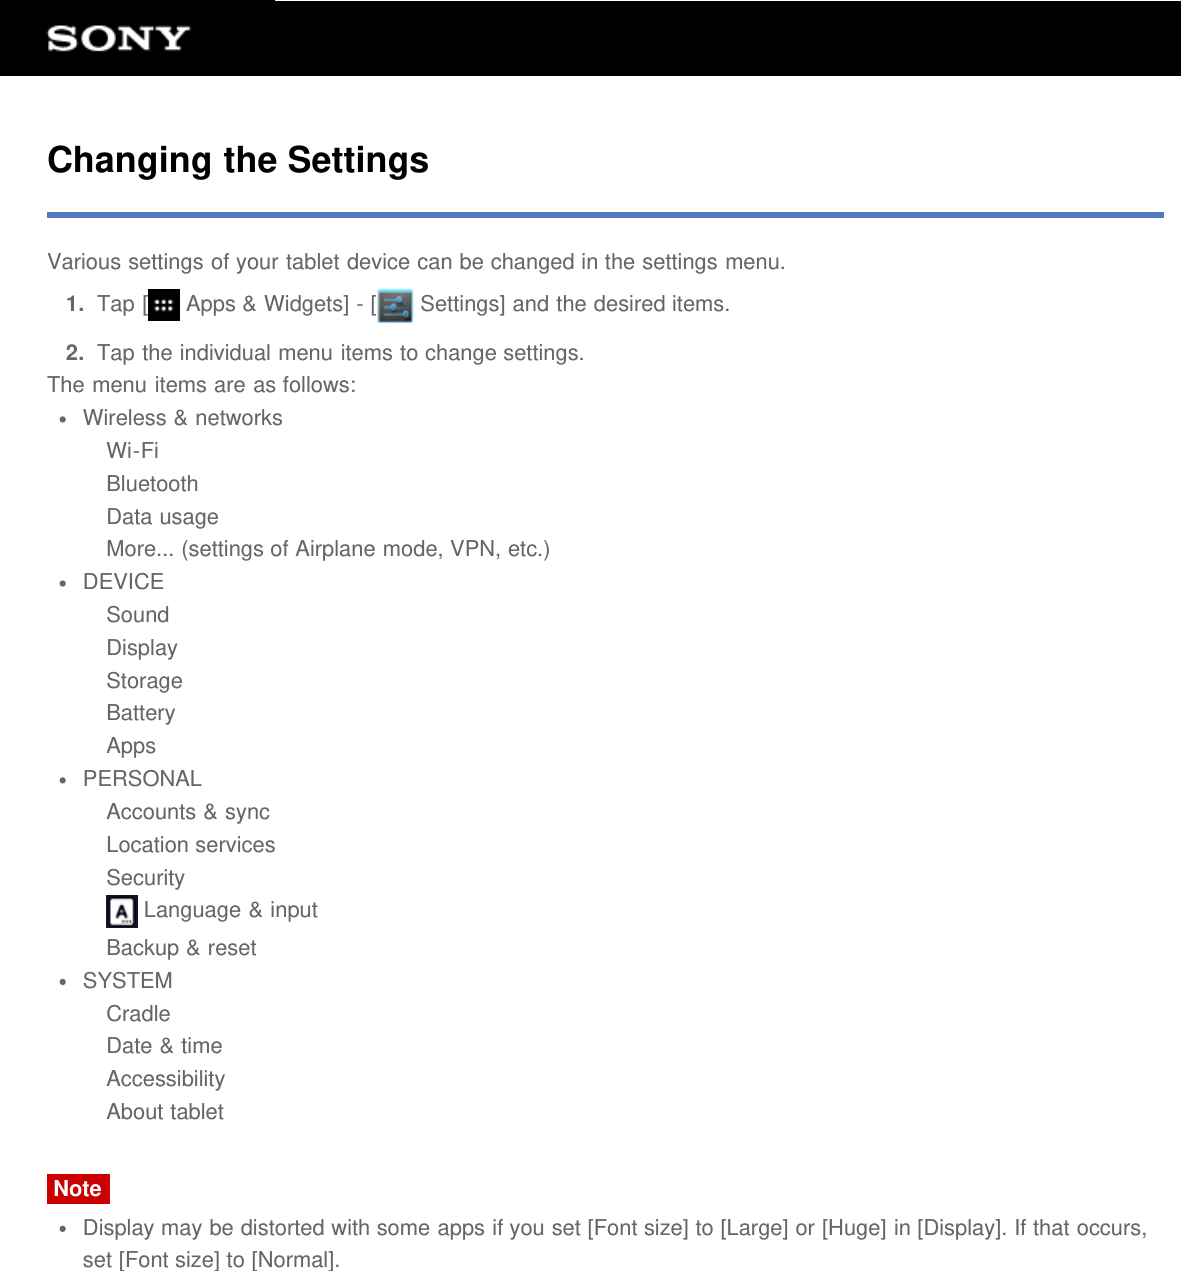 Changing the SettingsVarious settings of your tablet device can be changed in the settings menu.1.  Tap [  Apps &amp; Widgets] - [  Settings] and the desired items.2.  Tap the individual menu items to change settings.The menu items are as follows:Wireless &amp; networksWi-FiBluetoothData usageMore... (settings of Airplane mode, VPN, etc.)DEVICESoundDisplayStorageBatteryAppsPERSONALAccounts &amp; syncLocation servicesSecurity Language &amp; inputBackup &amp; resetSYSTEMCradleDate &amp; timeAccessibilityAbout tabletNoteDisplay may be distorted with some apps if you set [Font size] to [Large] or [Huge] in [Display]. If that occurs,set [Font size] to [Normal].